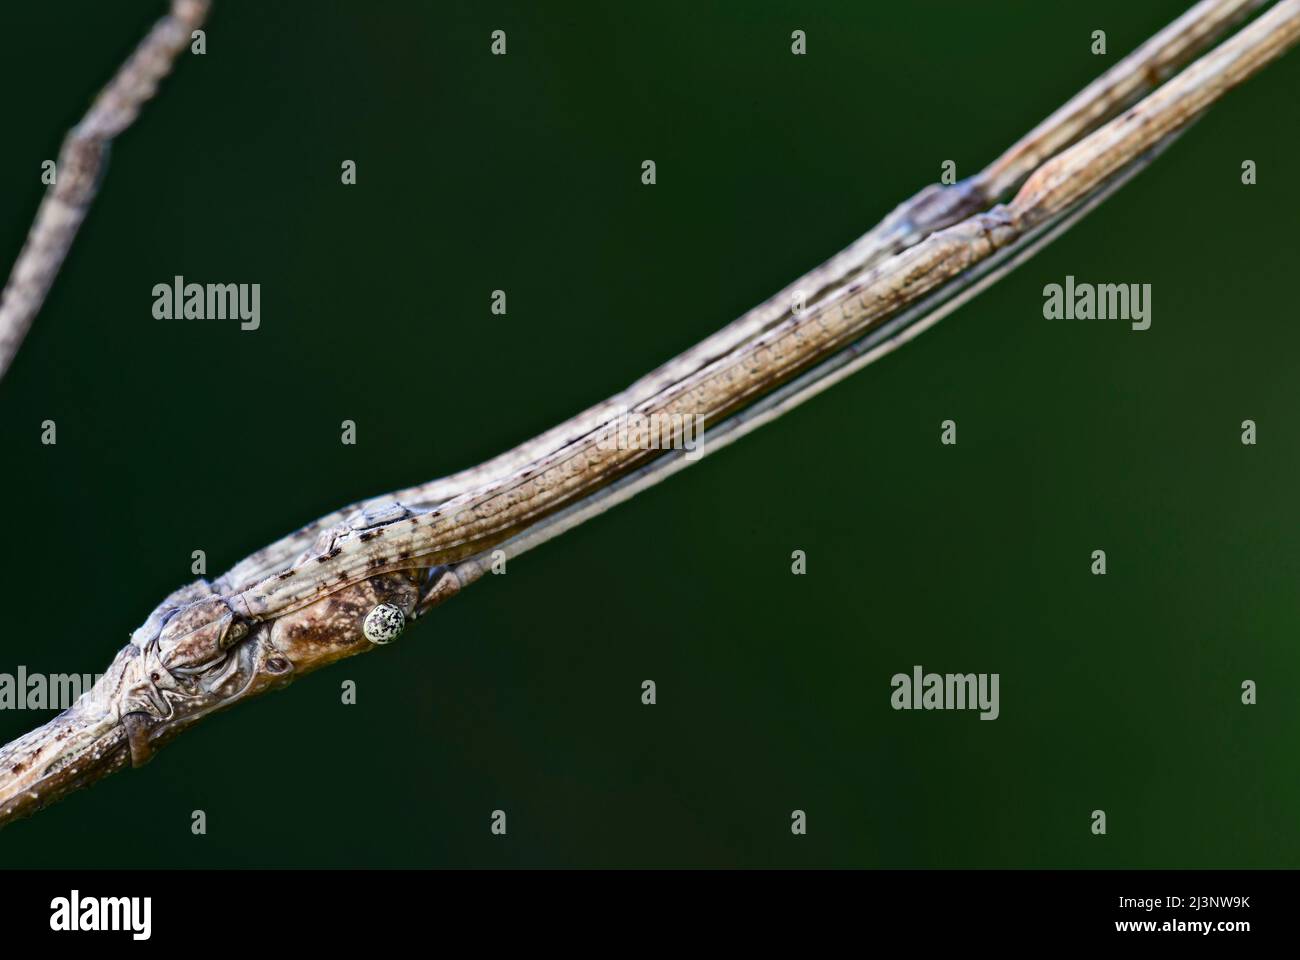 Portrait of White-kneed Stick Insect - Acacus sarawacus, unique special insect from Sarawak forests, Borneo, Malaysia. Stock Photo